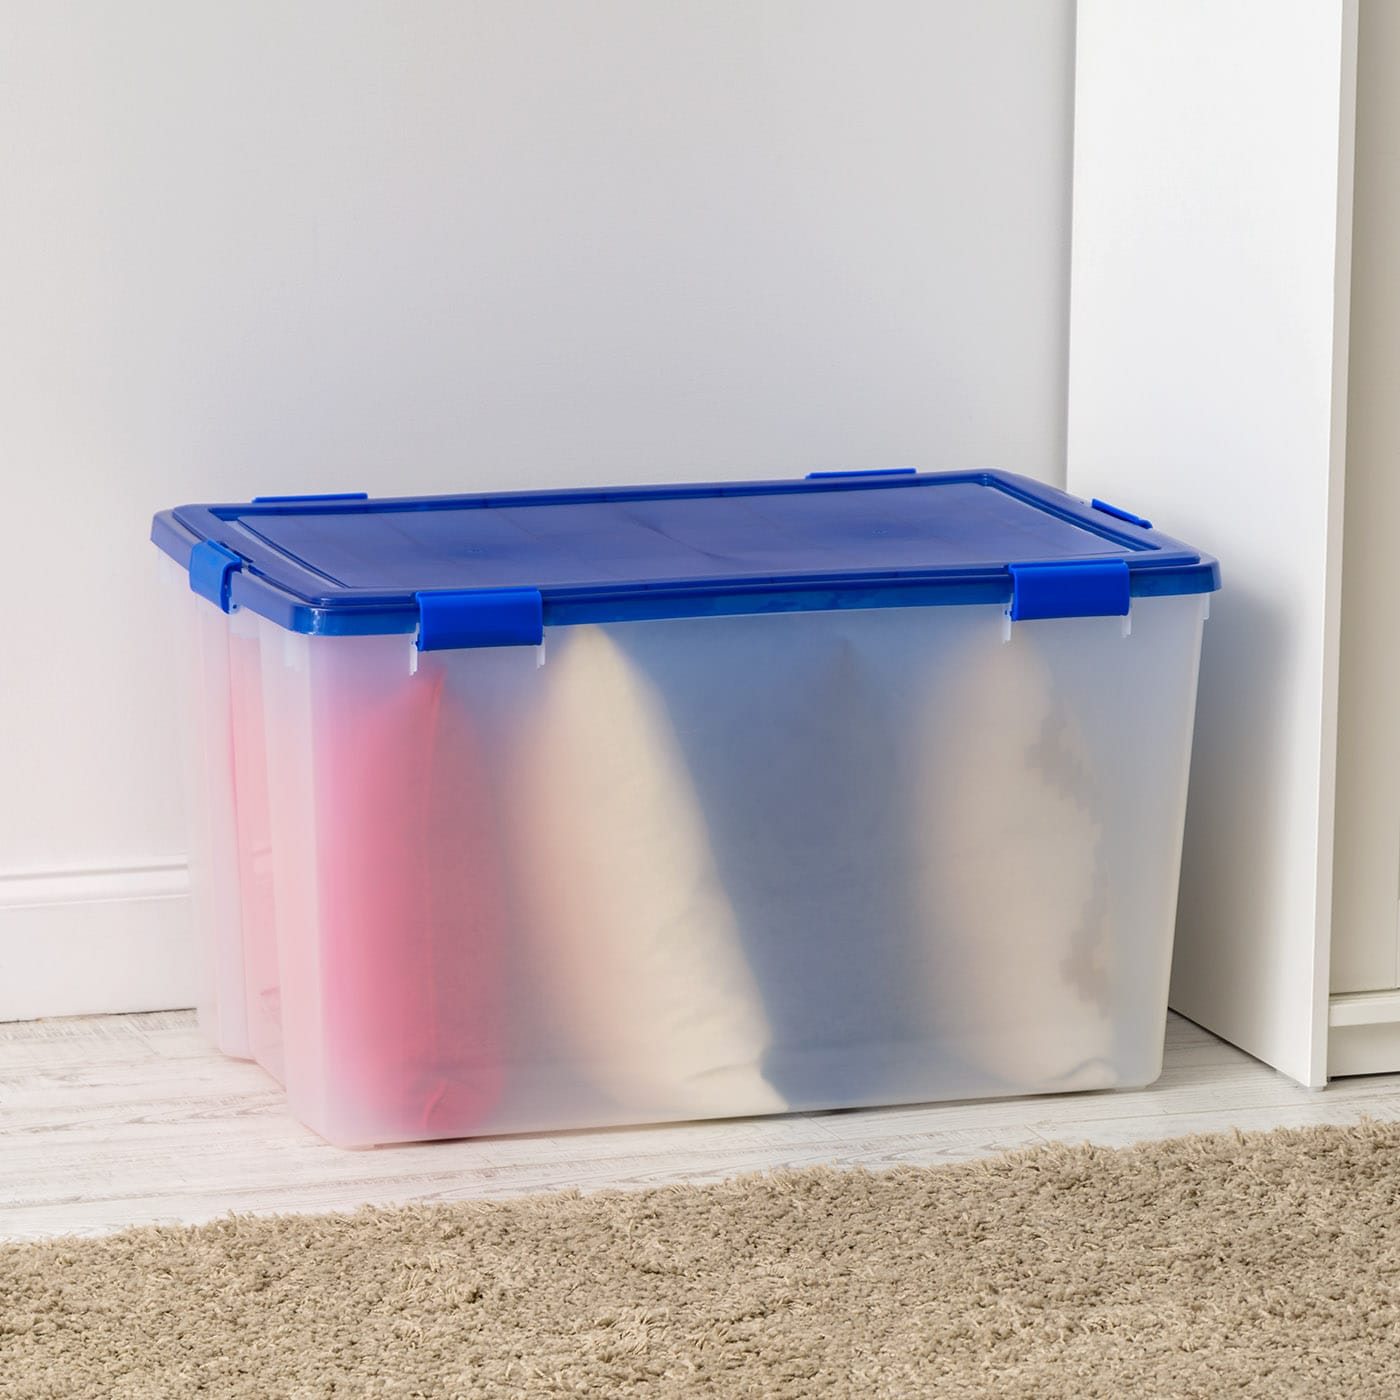 Iris 11 Gallon Clear Plastic Storage Boxes with Blue Lid, Pack of 4